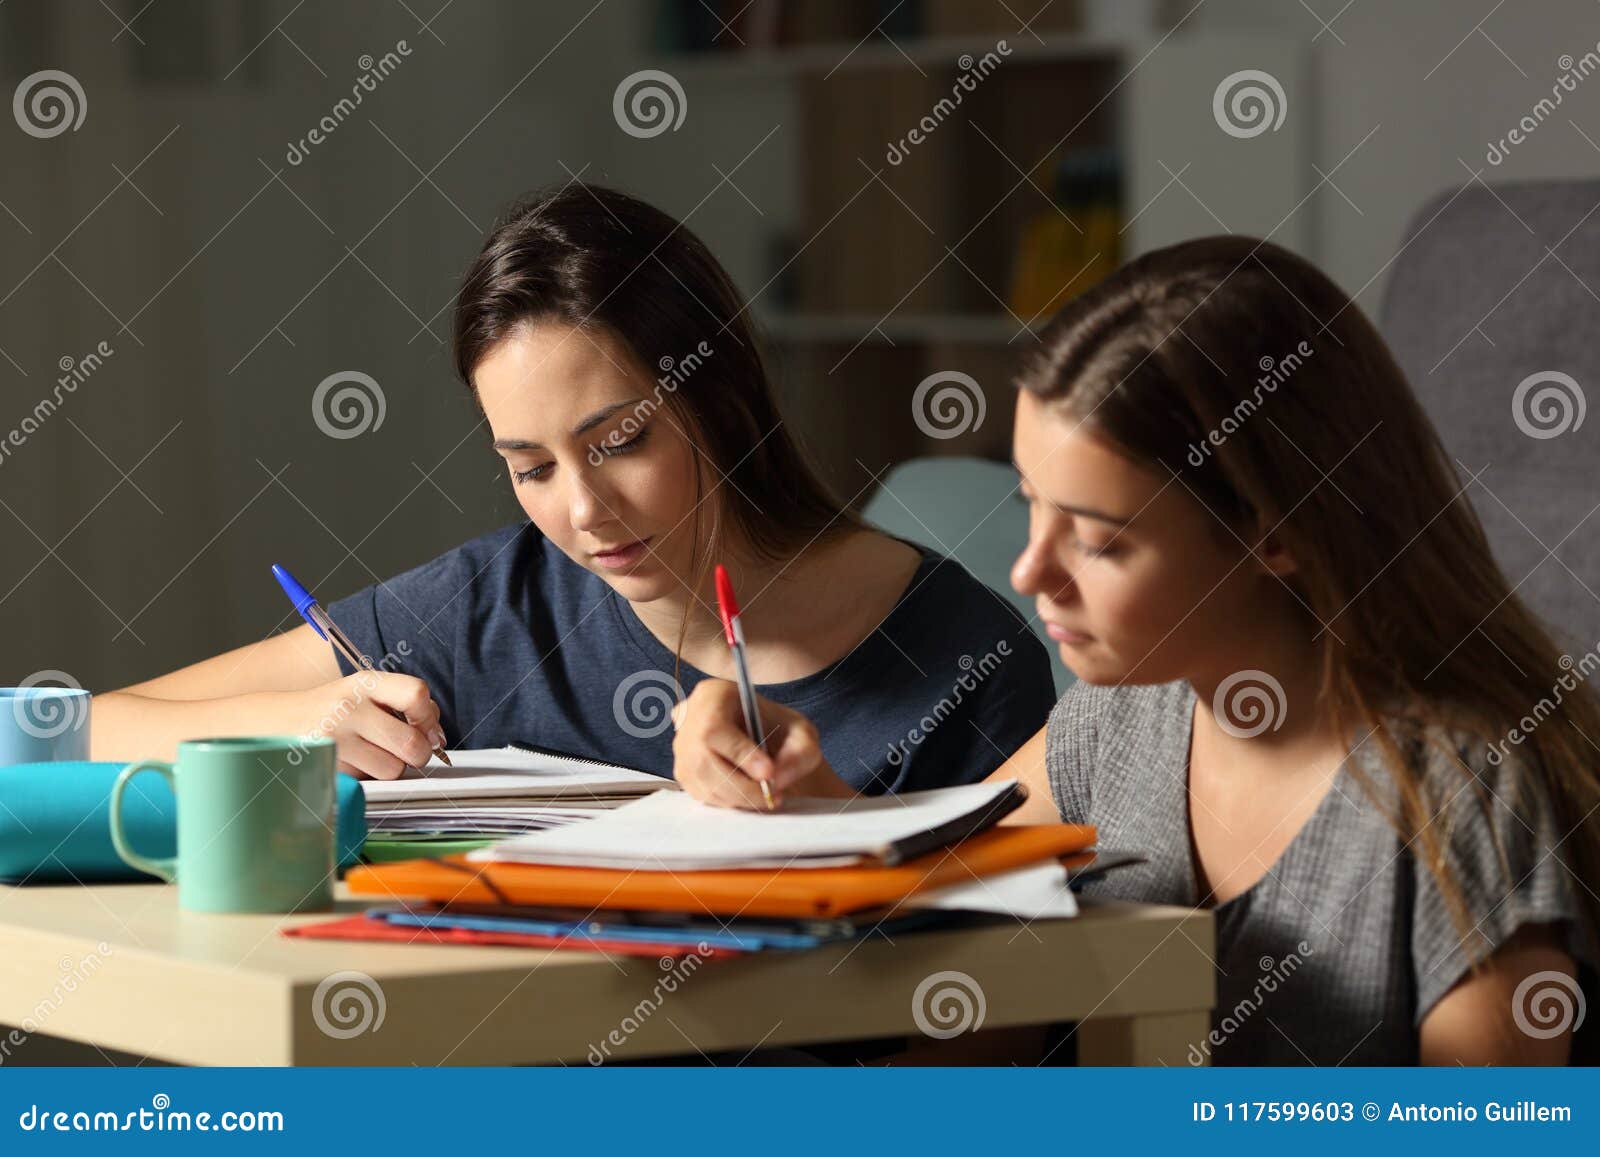 studious students studying hard in the night